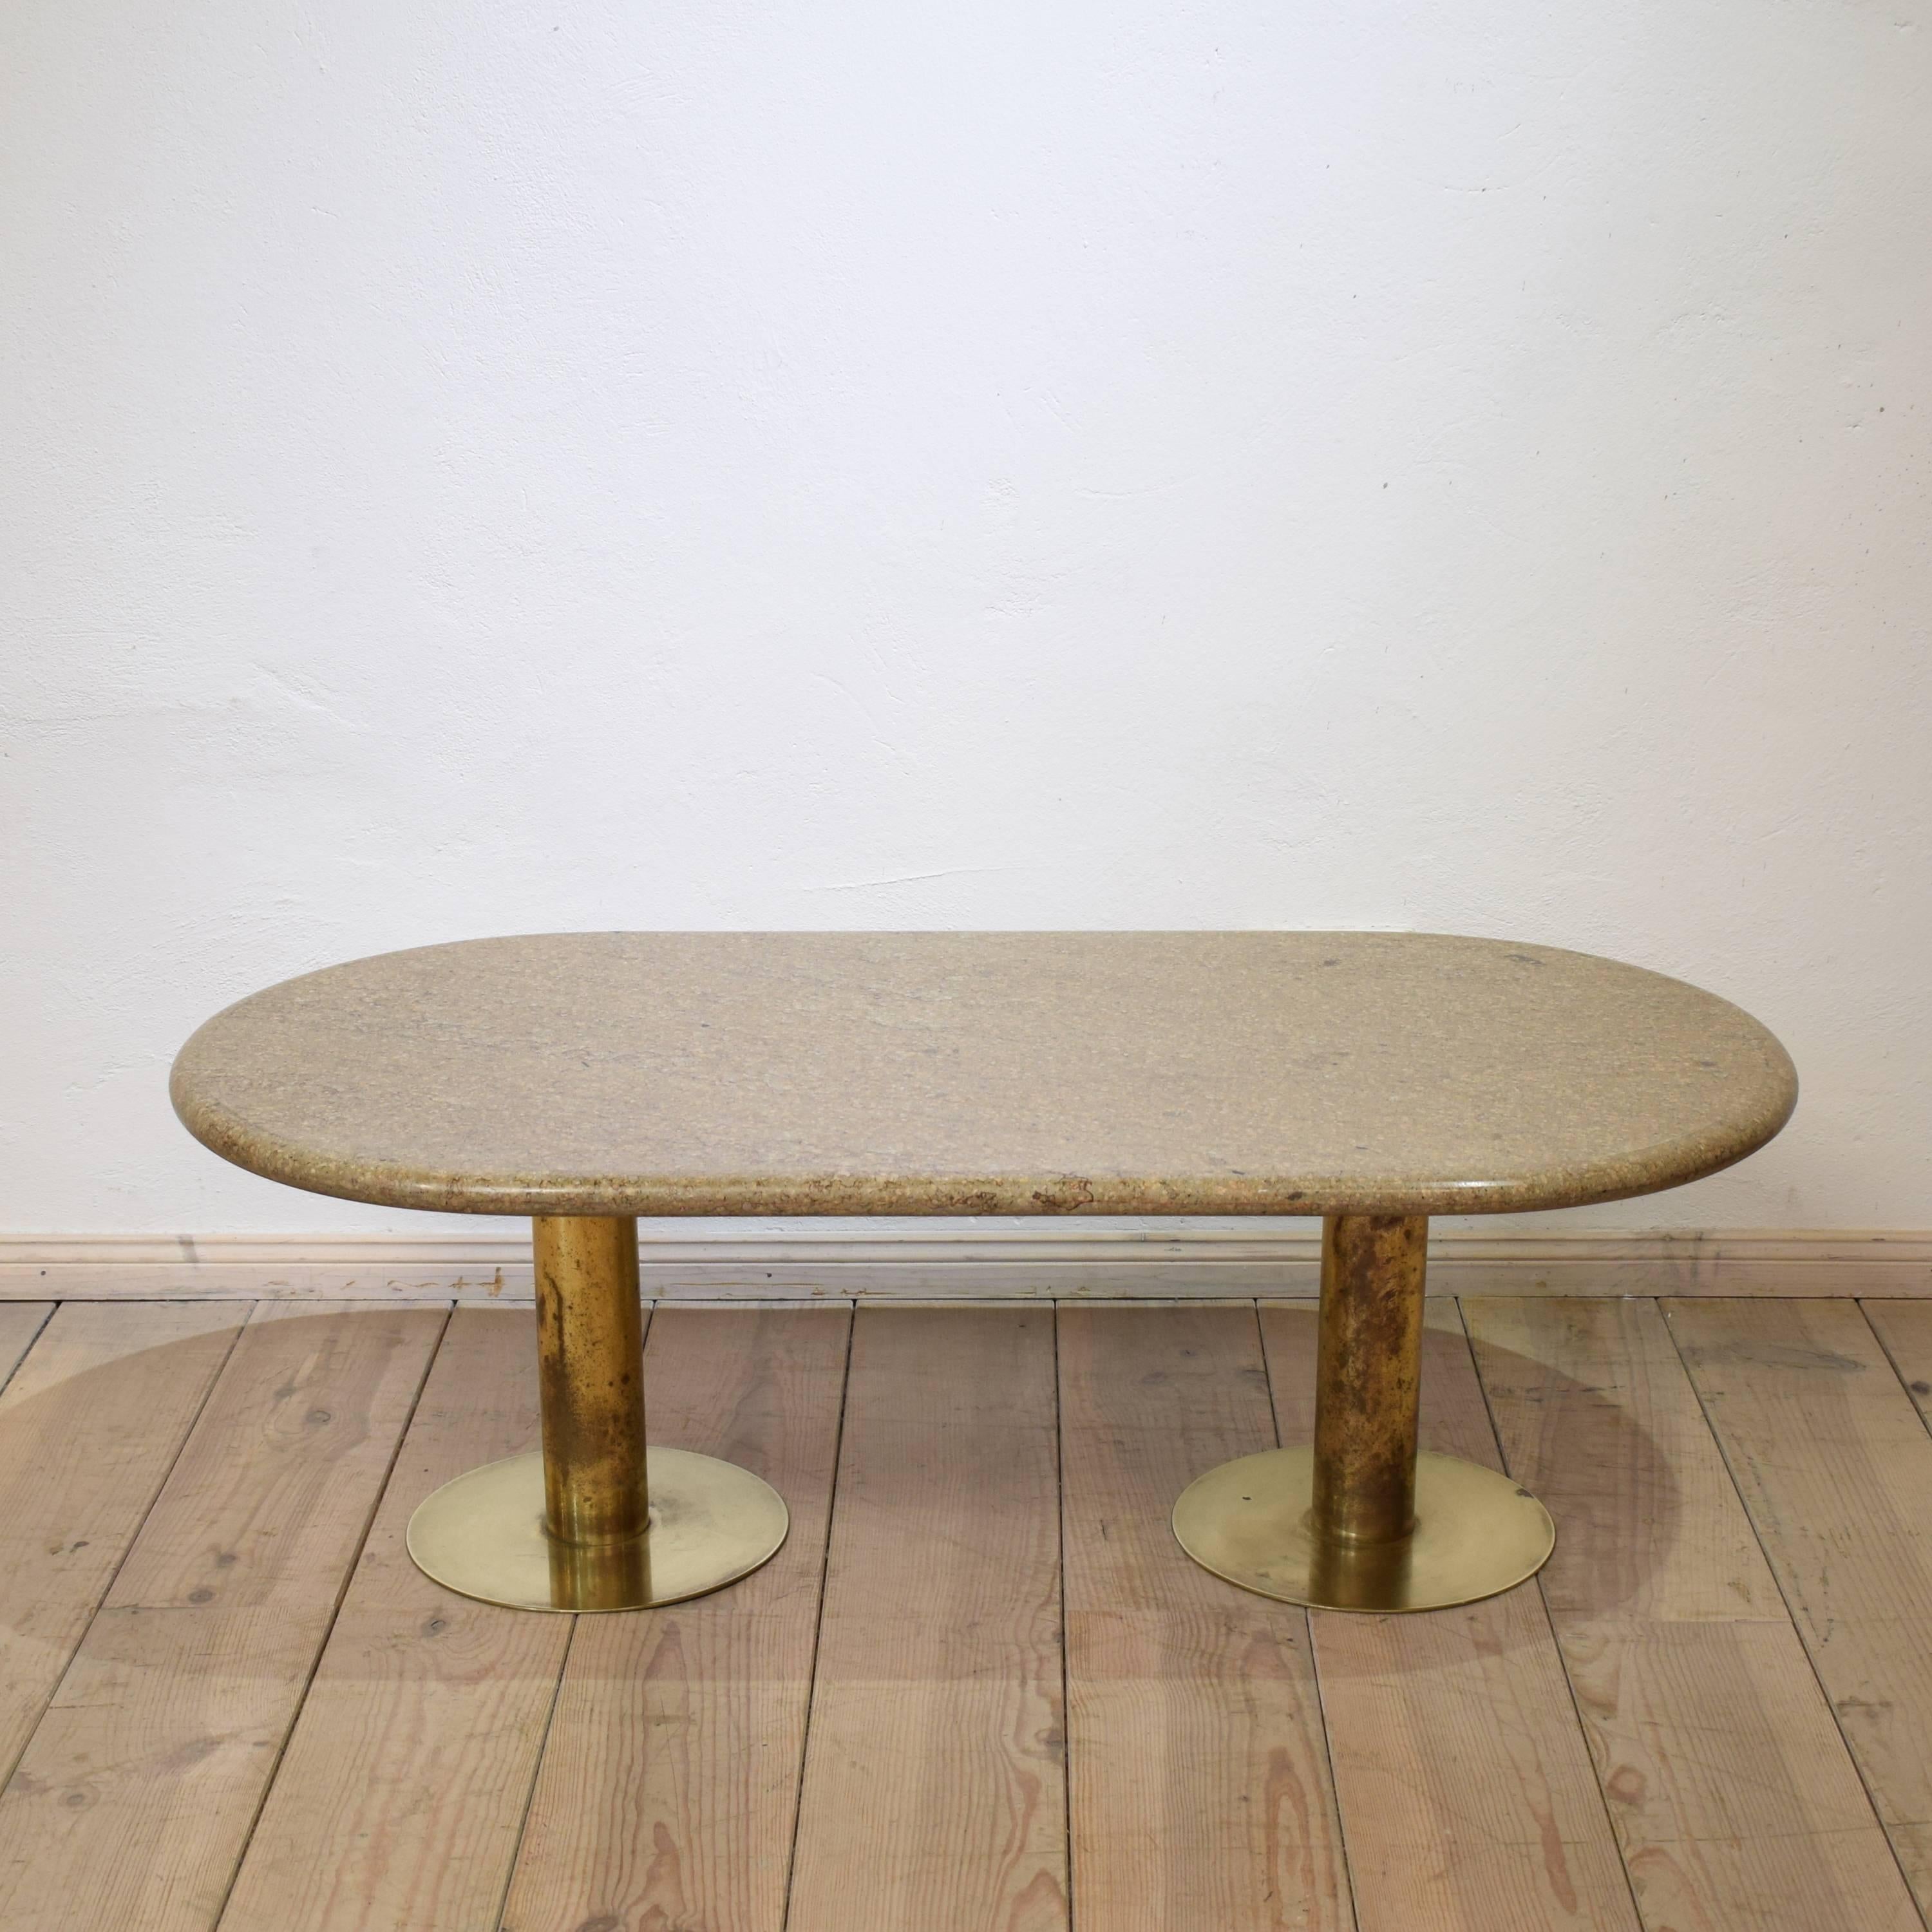 This rare midcentury Italian brass and marble side table from circa 1968 is very beautiful in color and shape. With the round corners and the two round brass legs it gives the table a very elegant and unique looking.
A great table which fits to a